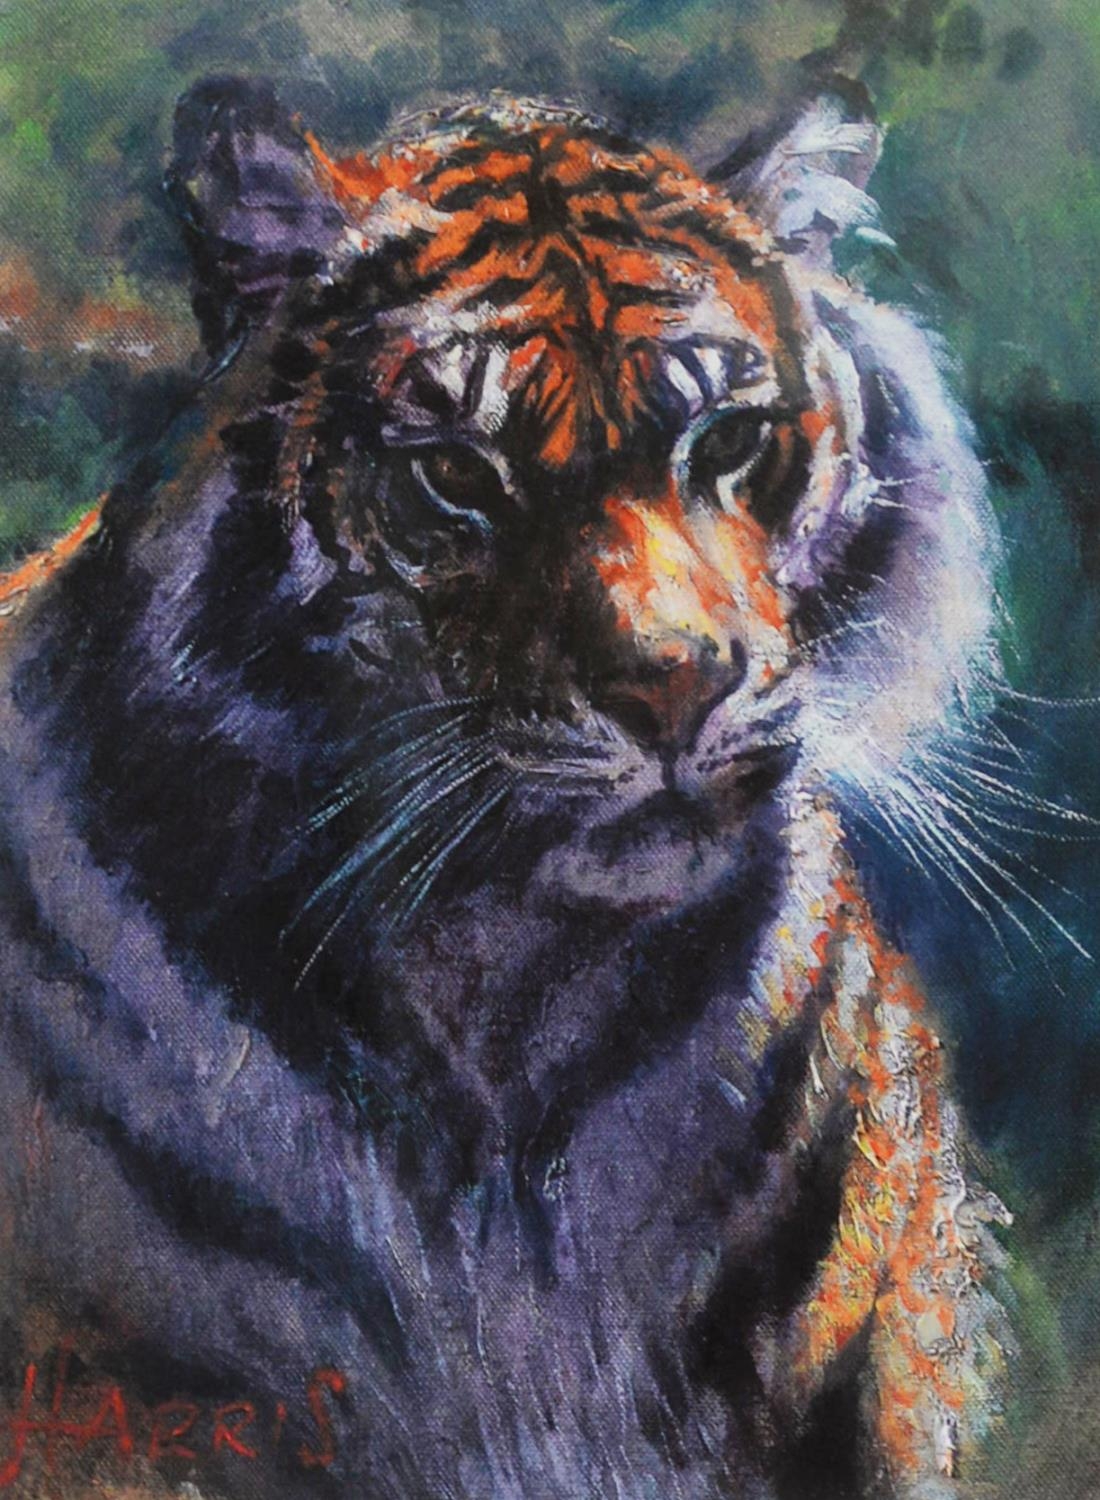 ROLF HARRIS (b.1930) ARTIST SIGNED LIMITED EDITION COLOUR PRINT ON PAPER ‘Tiger in the Sun’ (69/195)